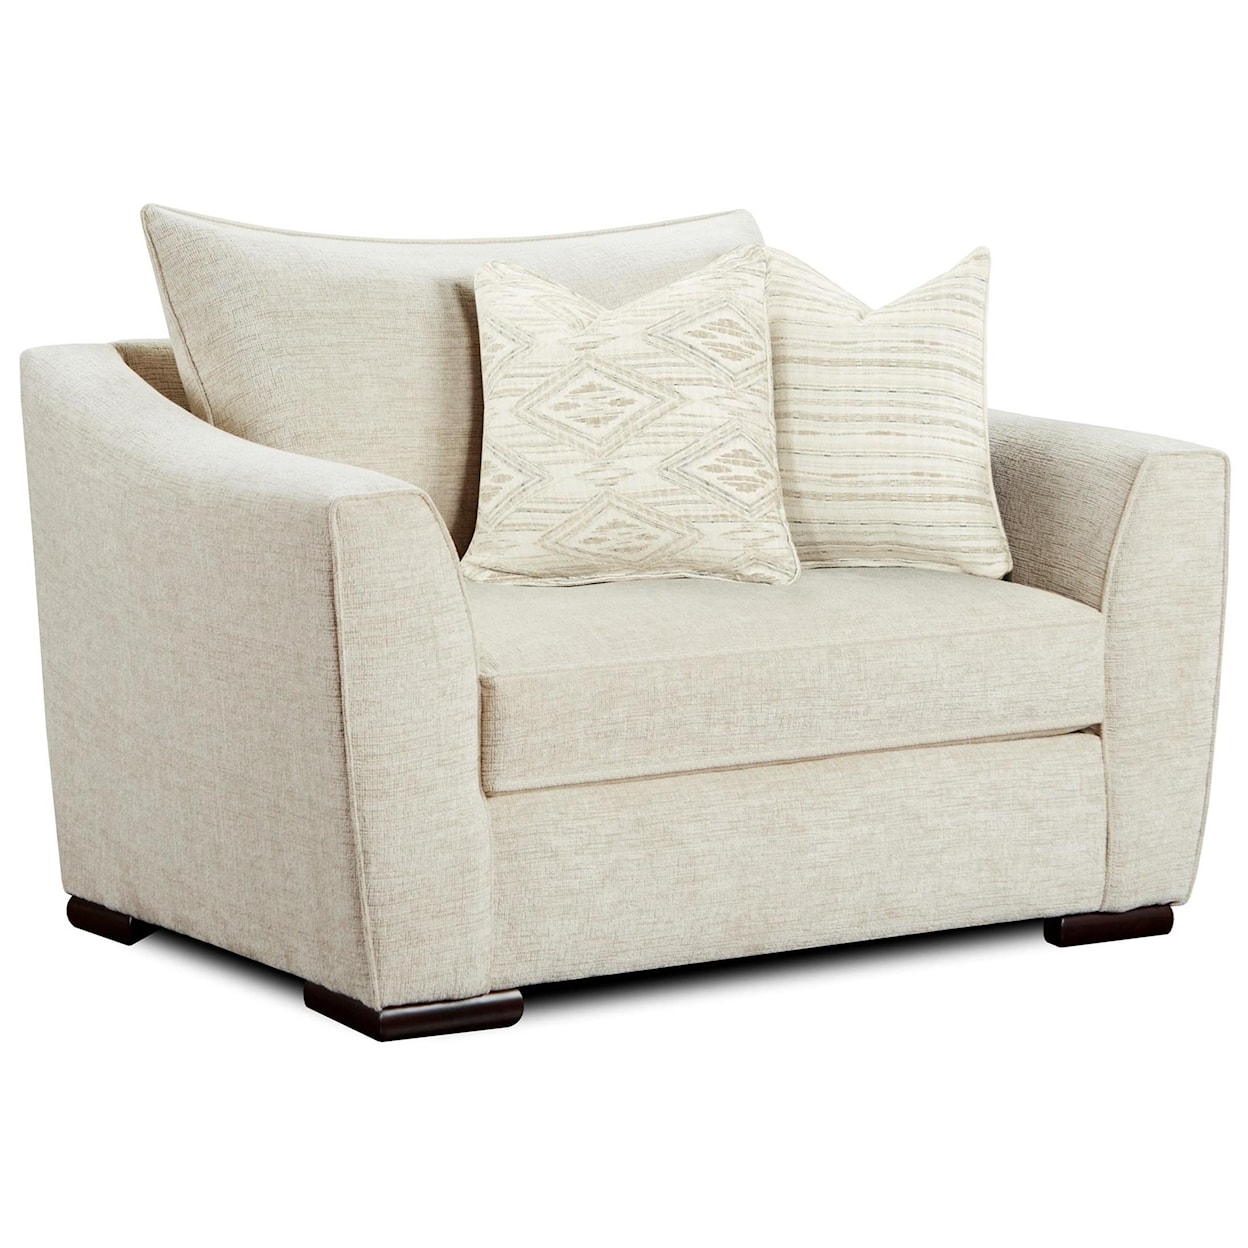 Fusion Furniture 9778 VIBRANT VISION OATMEAL Chair and a Half